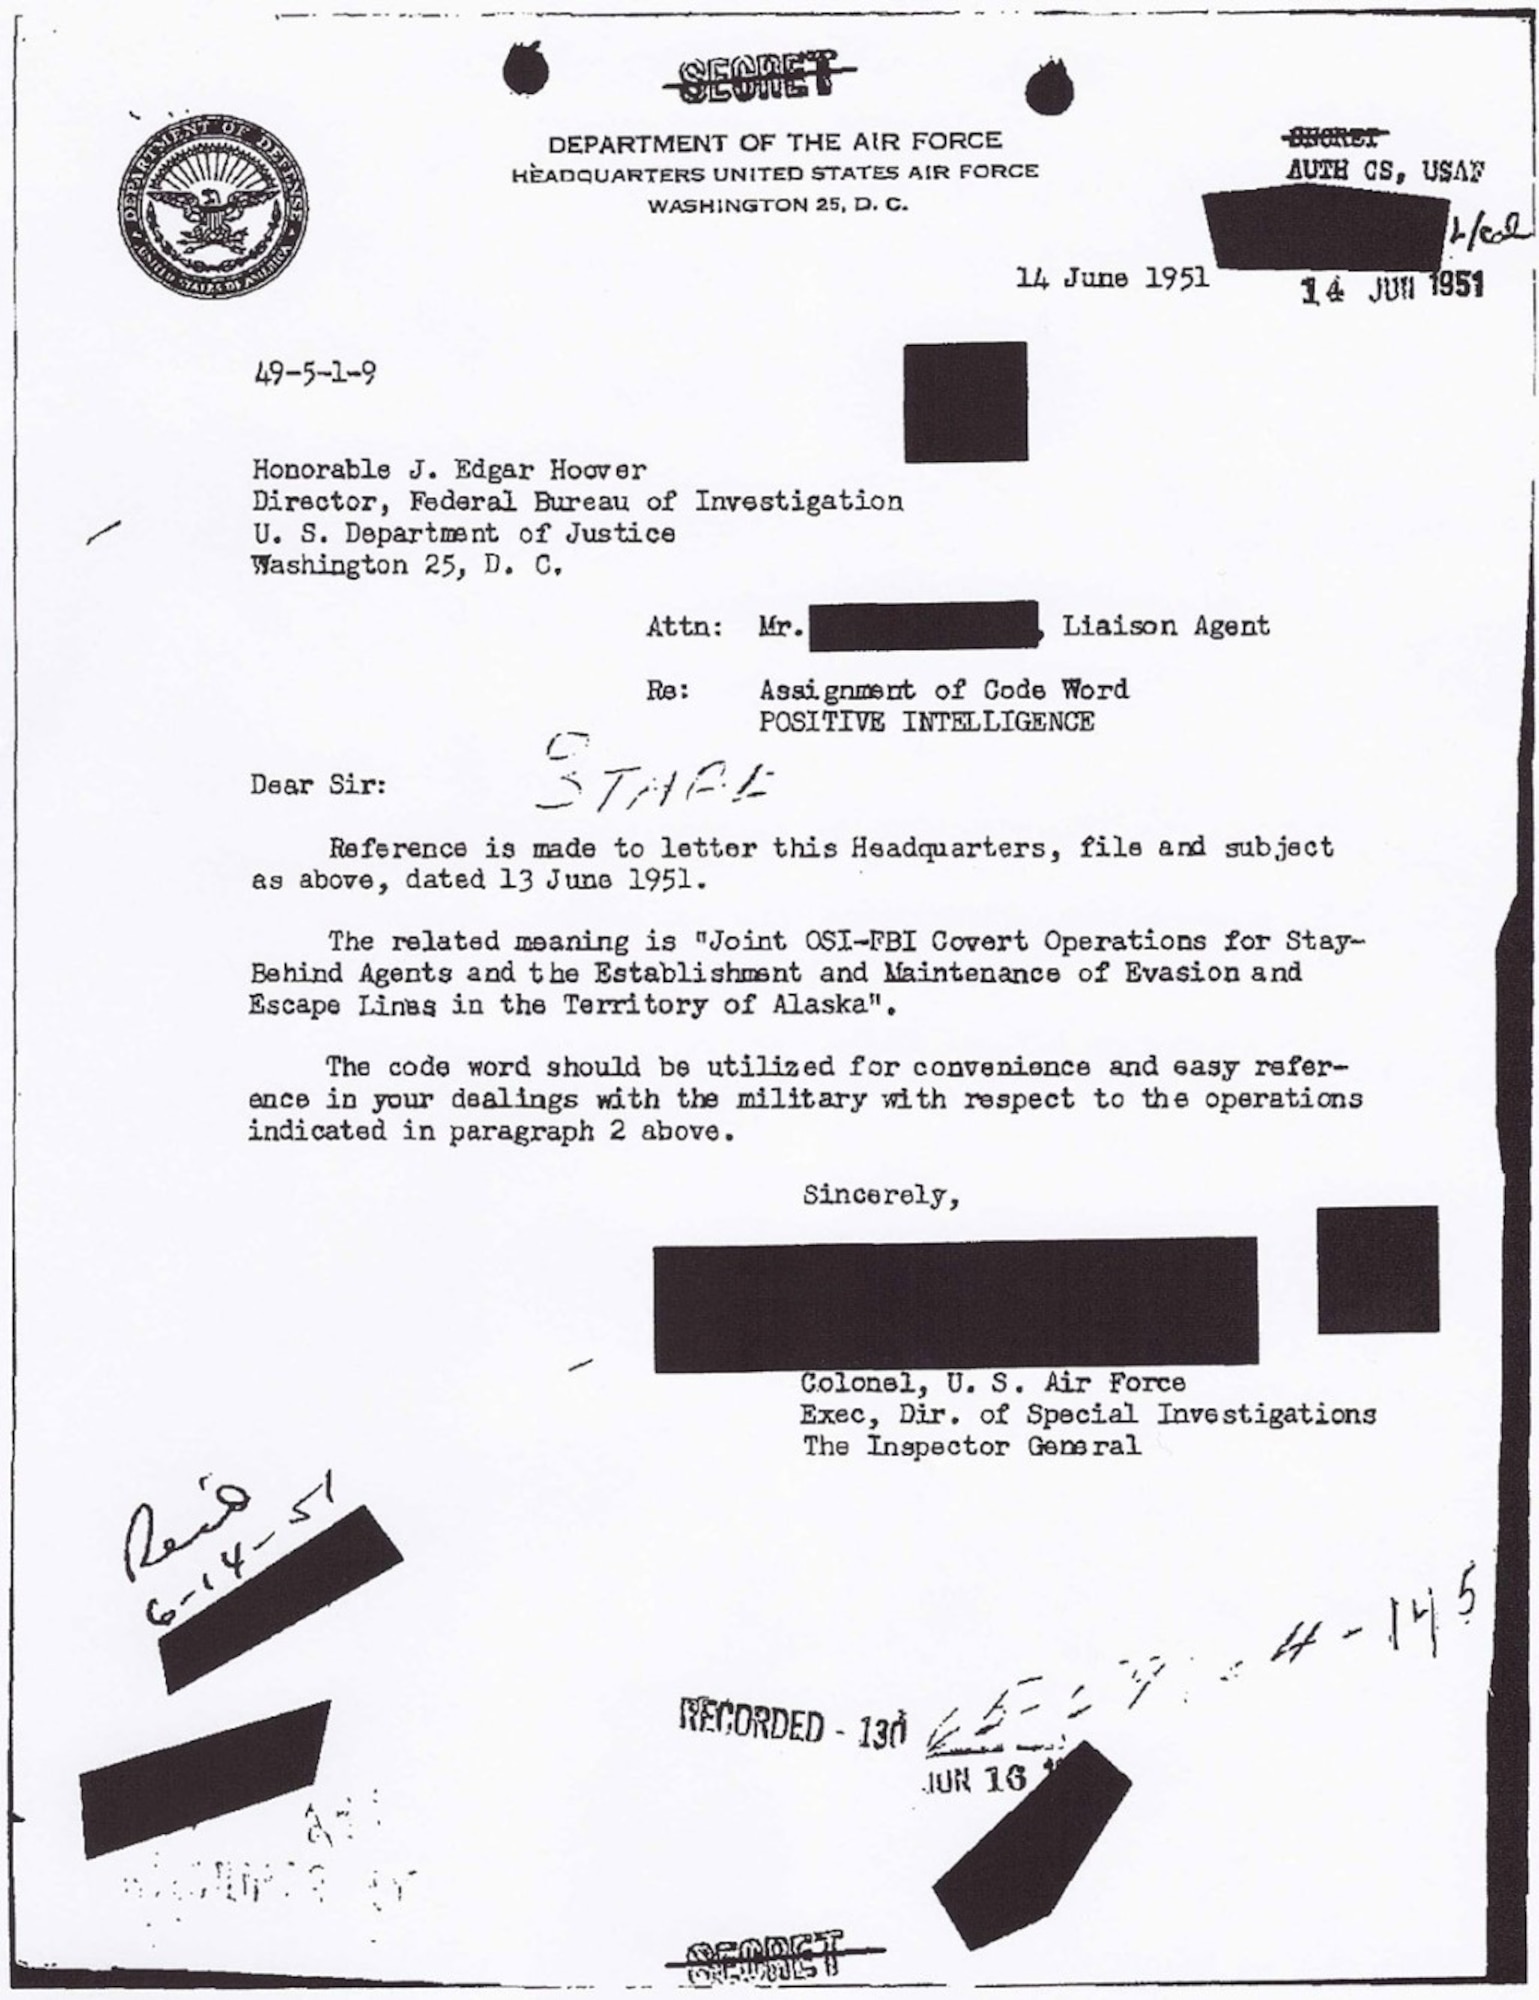 On June 14, 1951, this Air Force document referenced the  assignment of a code word to the joint OSI and FBI covert operations for Stay Behind Agents. (New York Post photo)